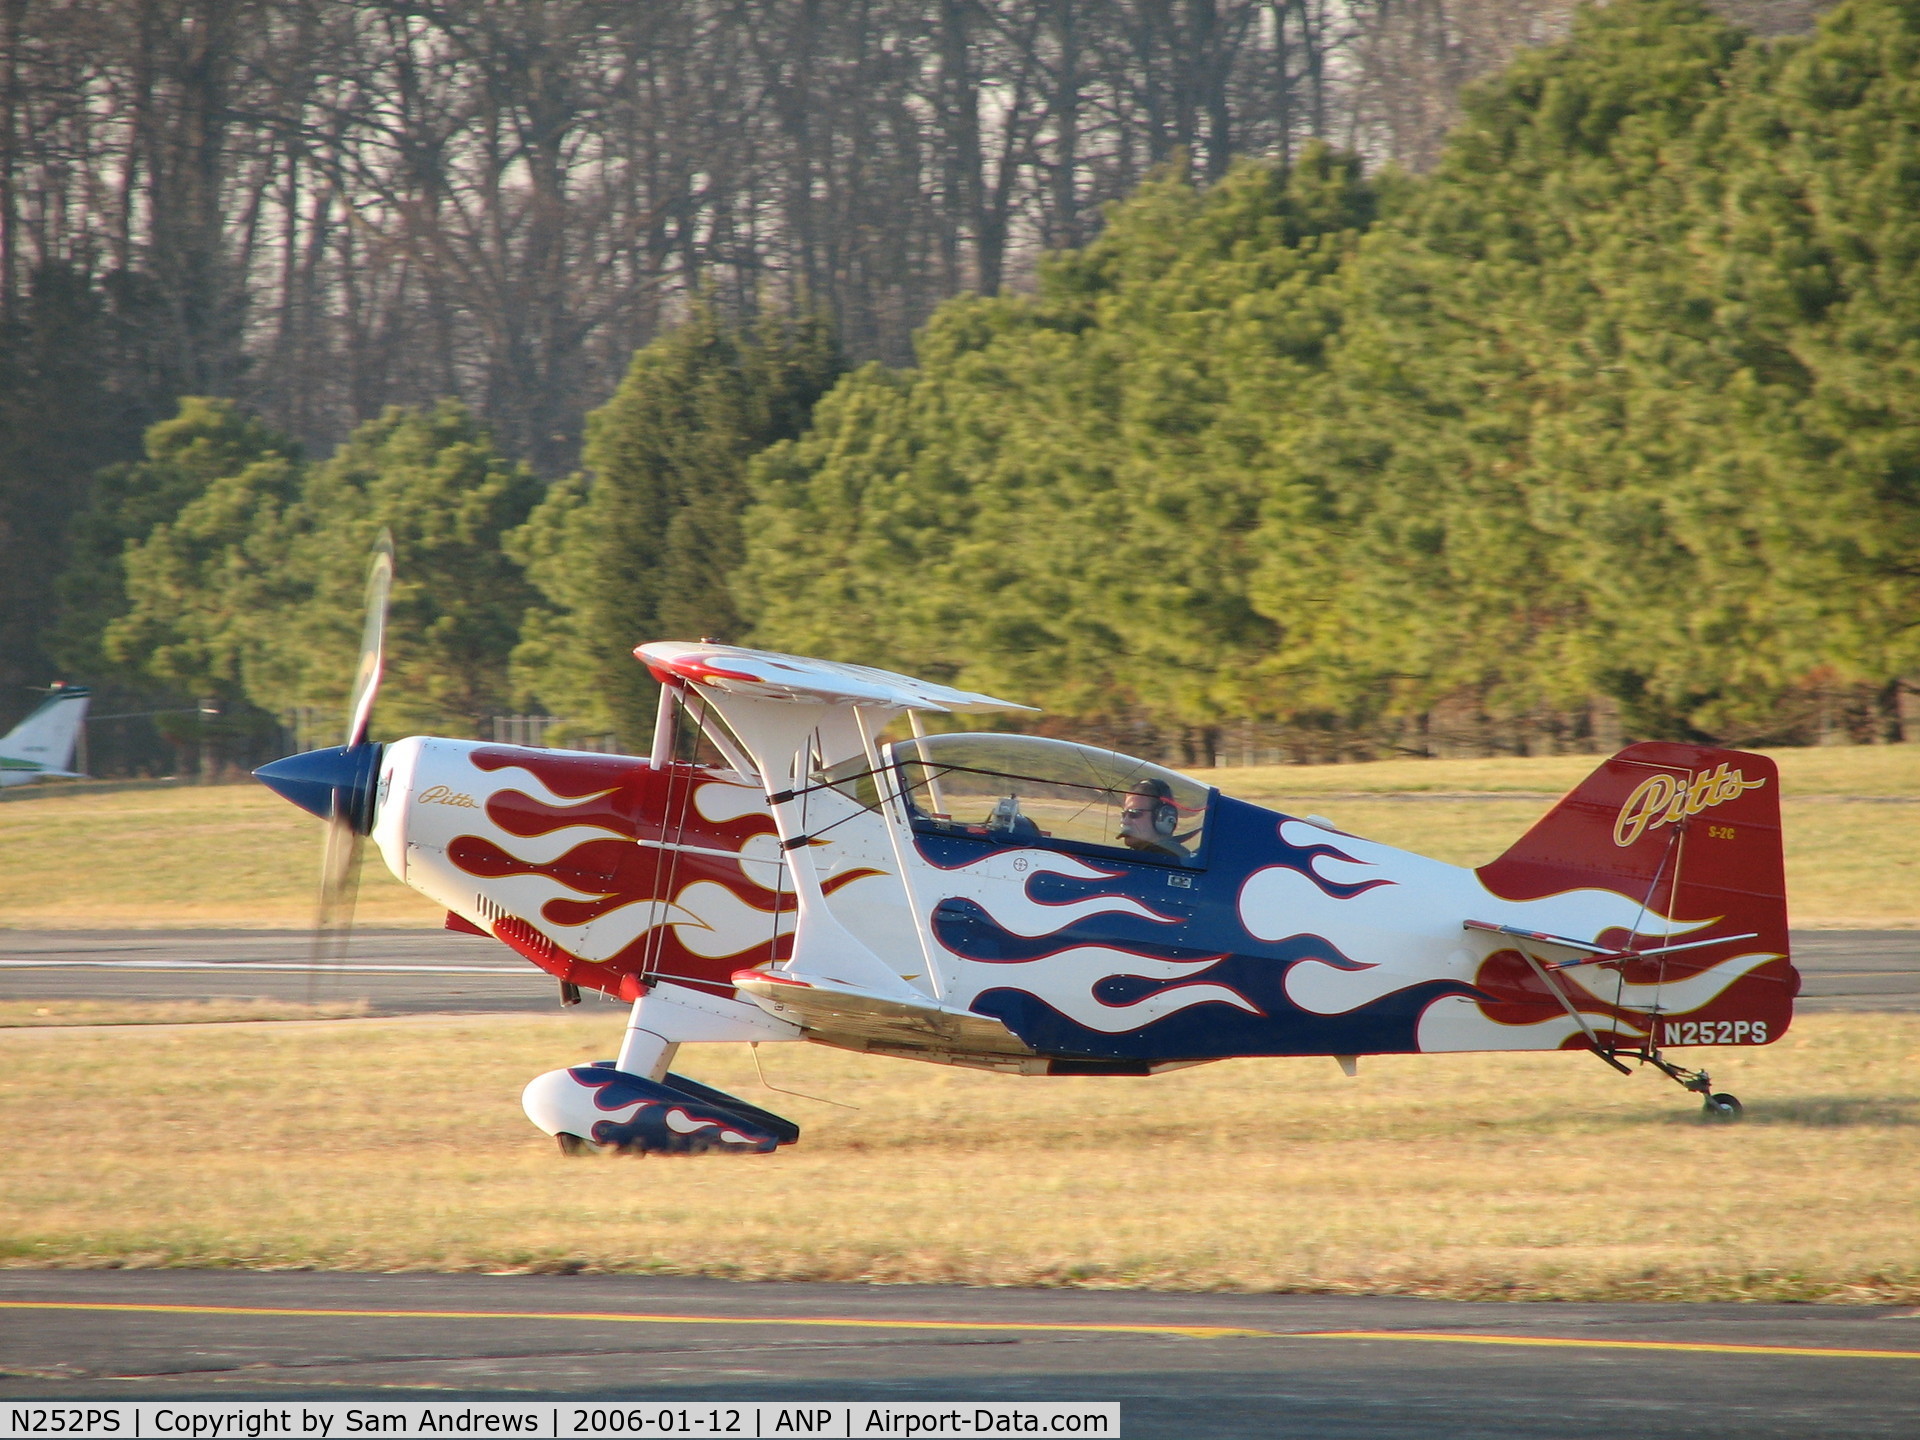 N252PS, 1999 Aviat Pitts S-2B Special C/N 5334, Side view while taxiing around